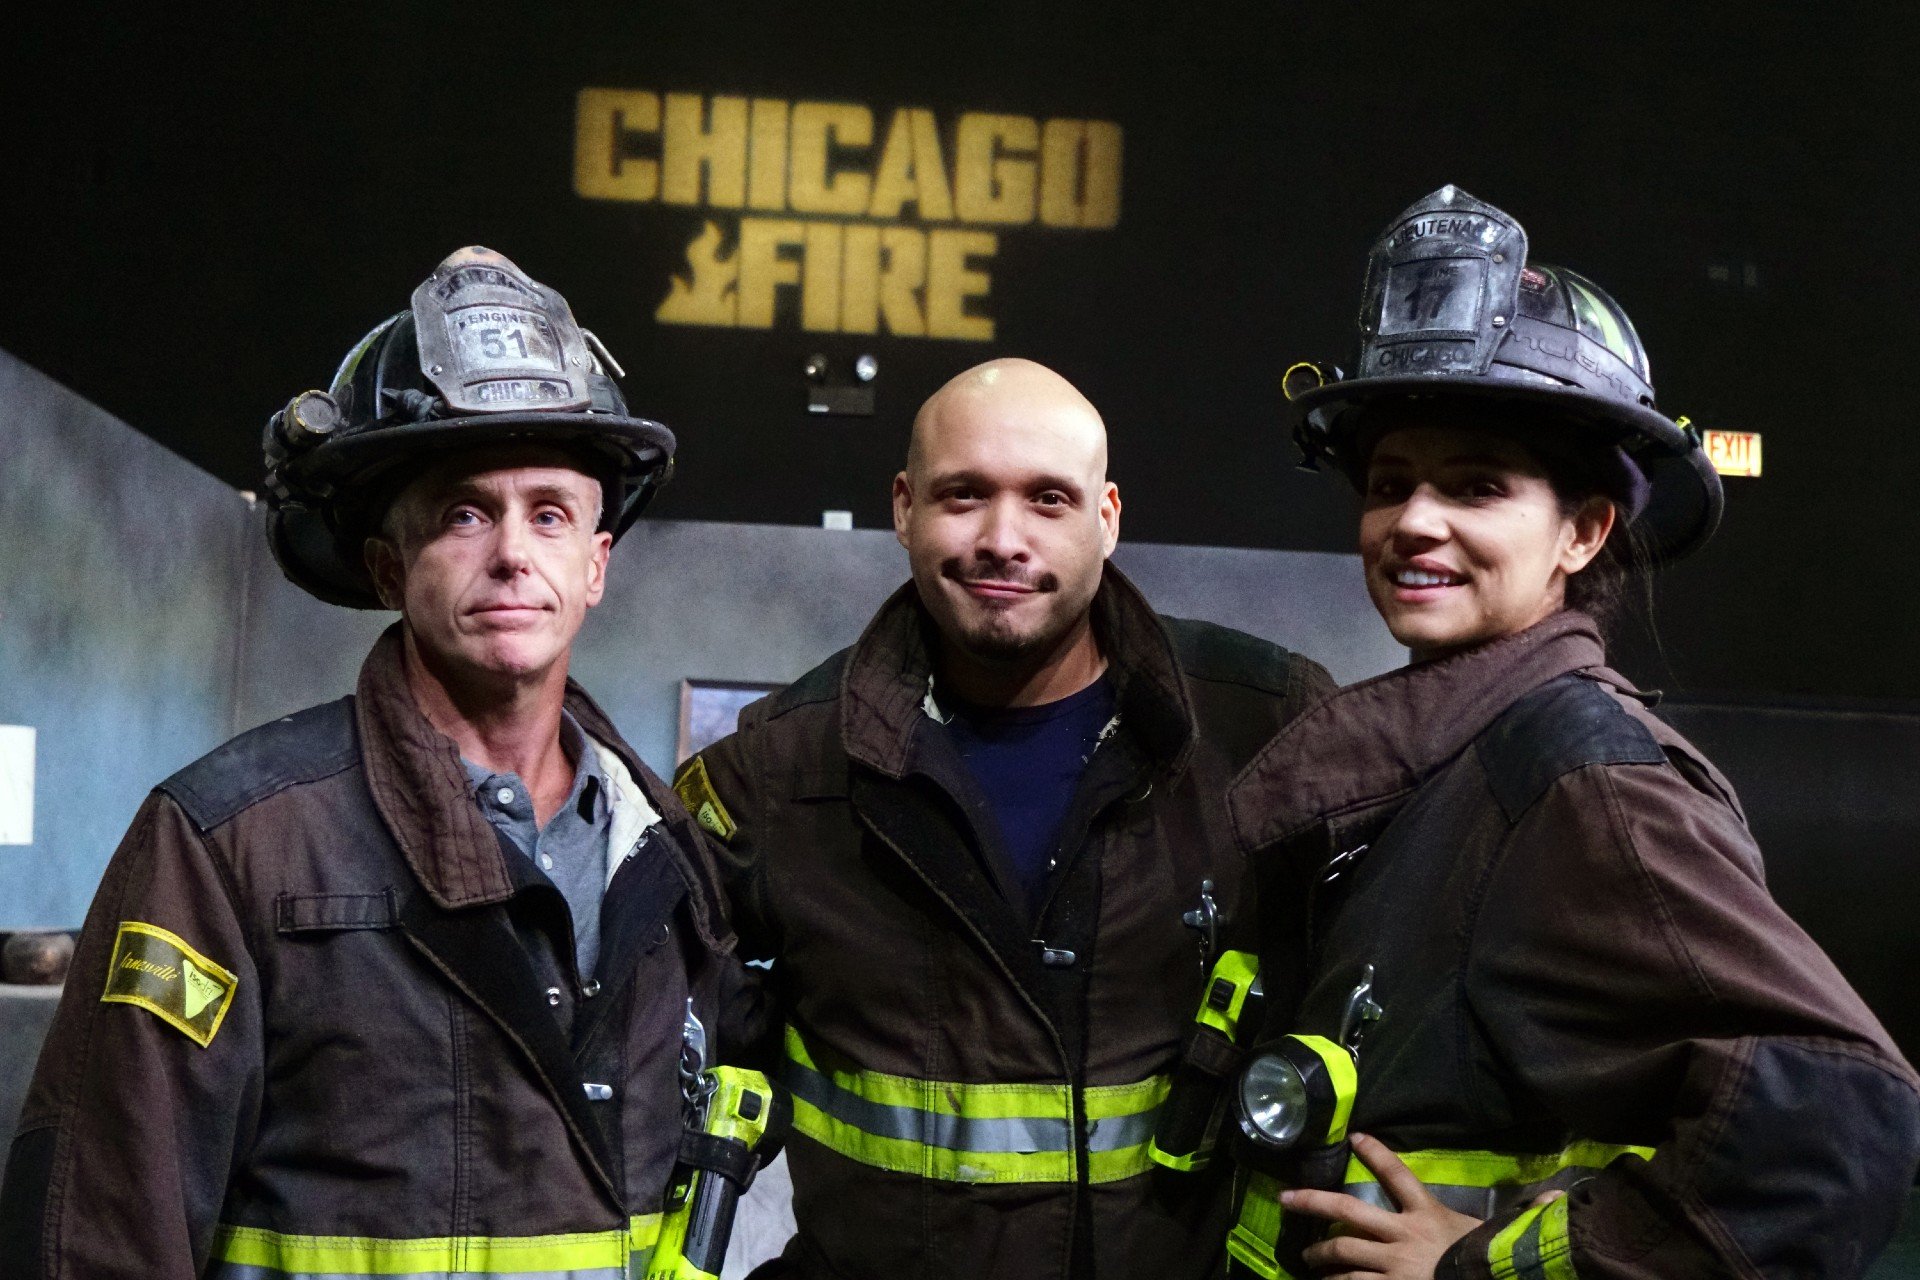 The cast of Chicago Fire poses for a photo.